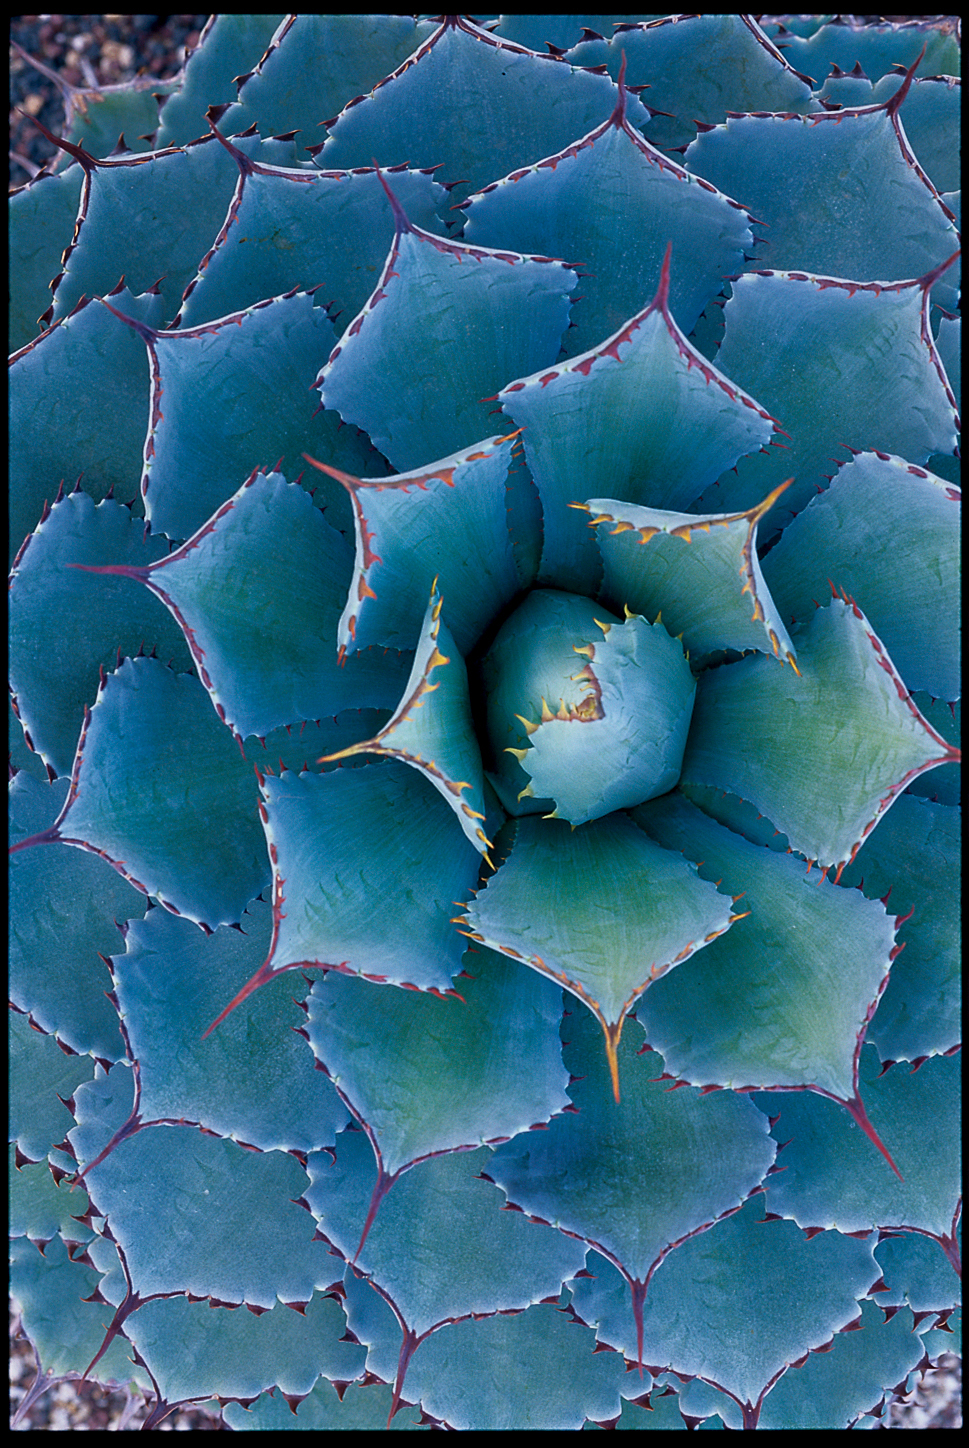 The Most Beautiful Agave Plants And How To Care For Them Sunset Sunset Magazine,Virginia Sweetspire Little Henry